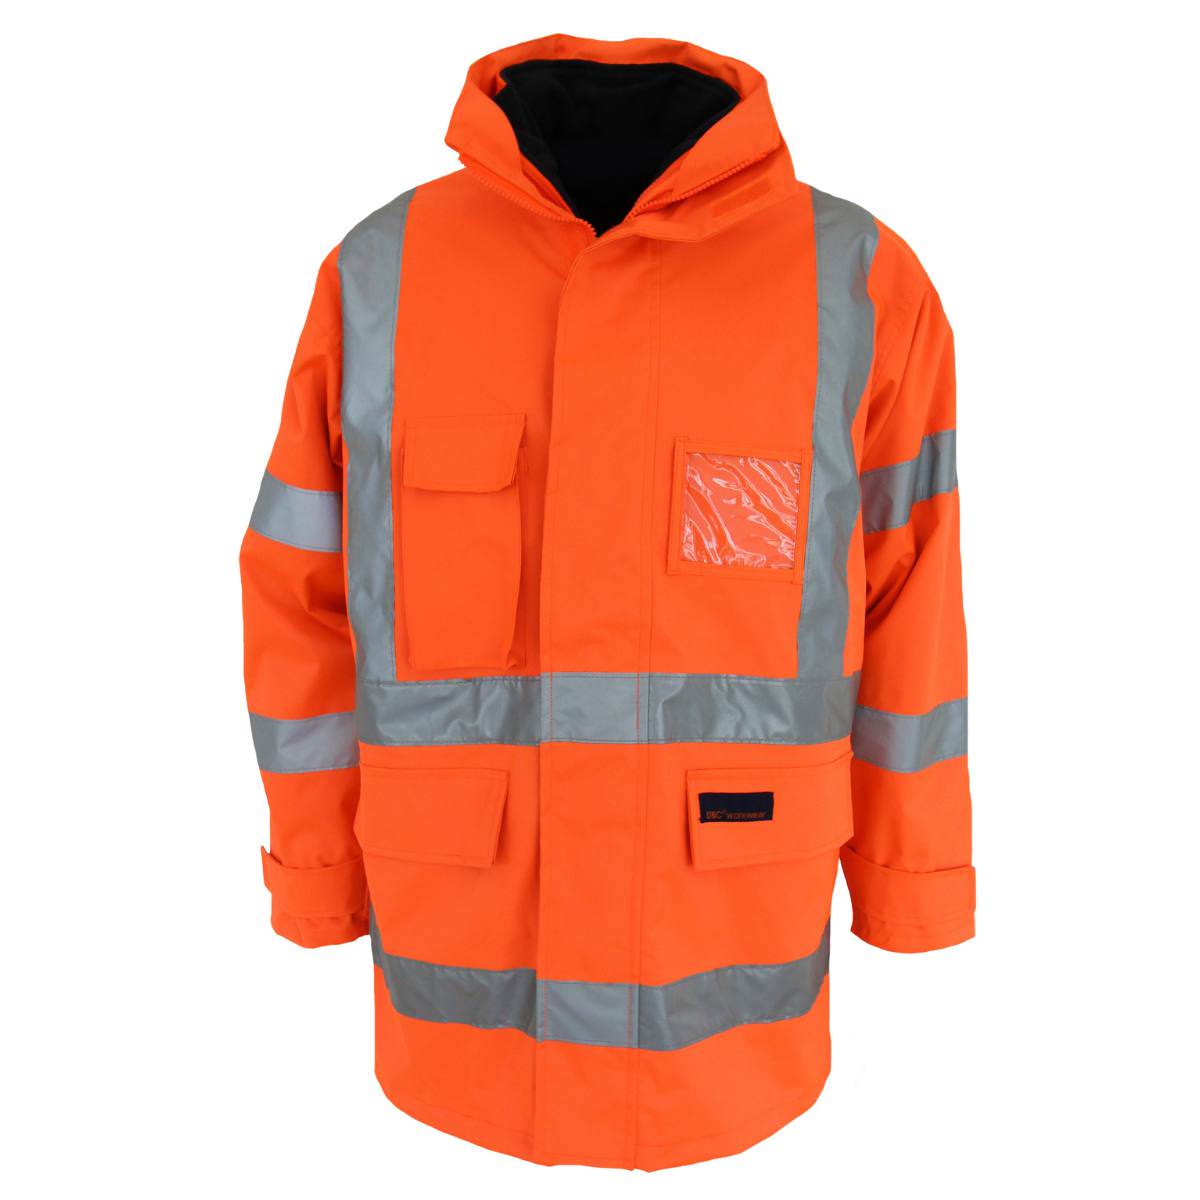 DNC HiVis "6 in 1" Breathable rain jacket Biomotion 3572